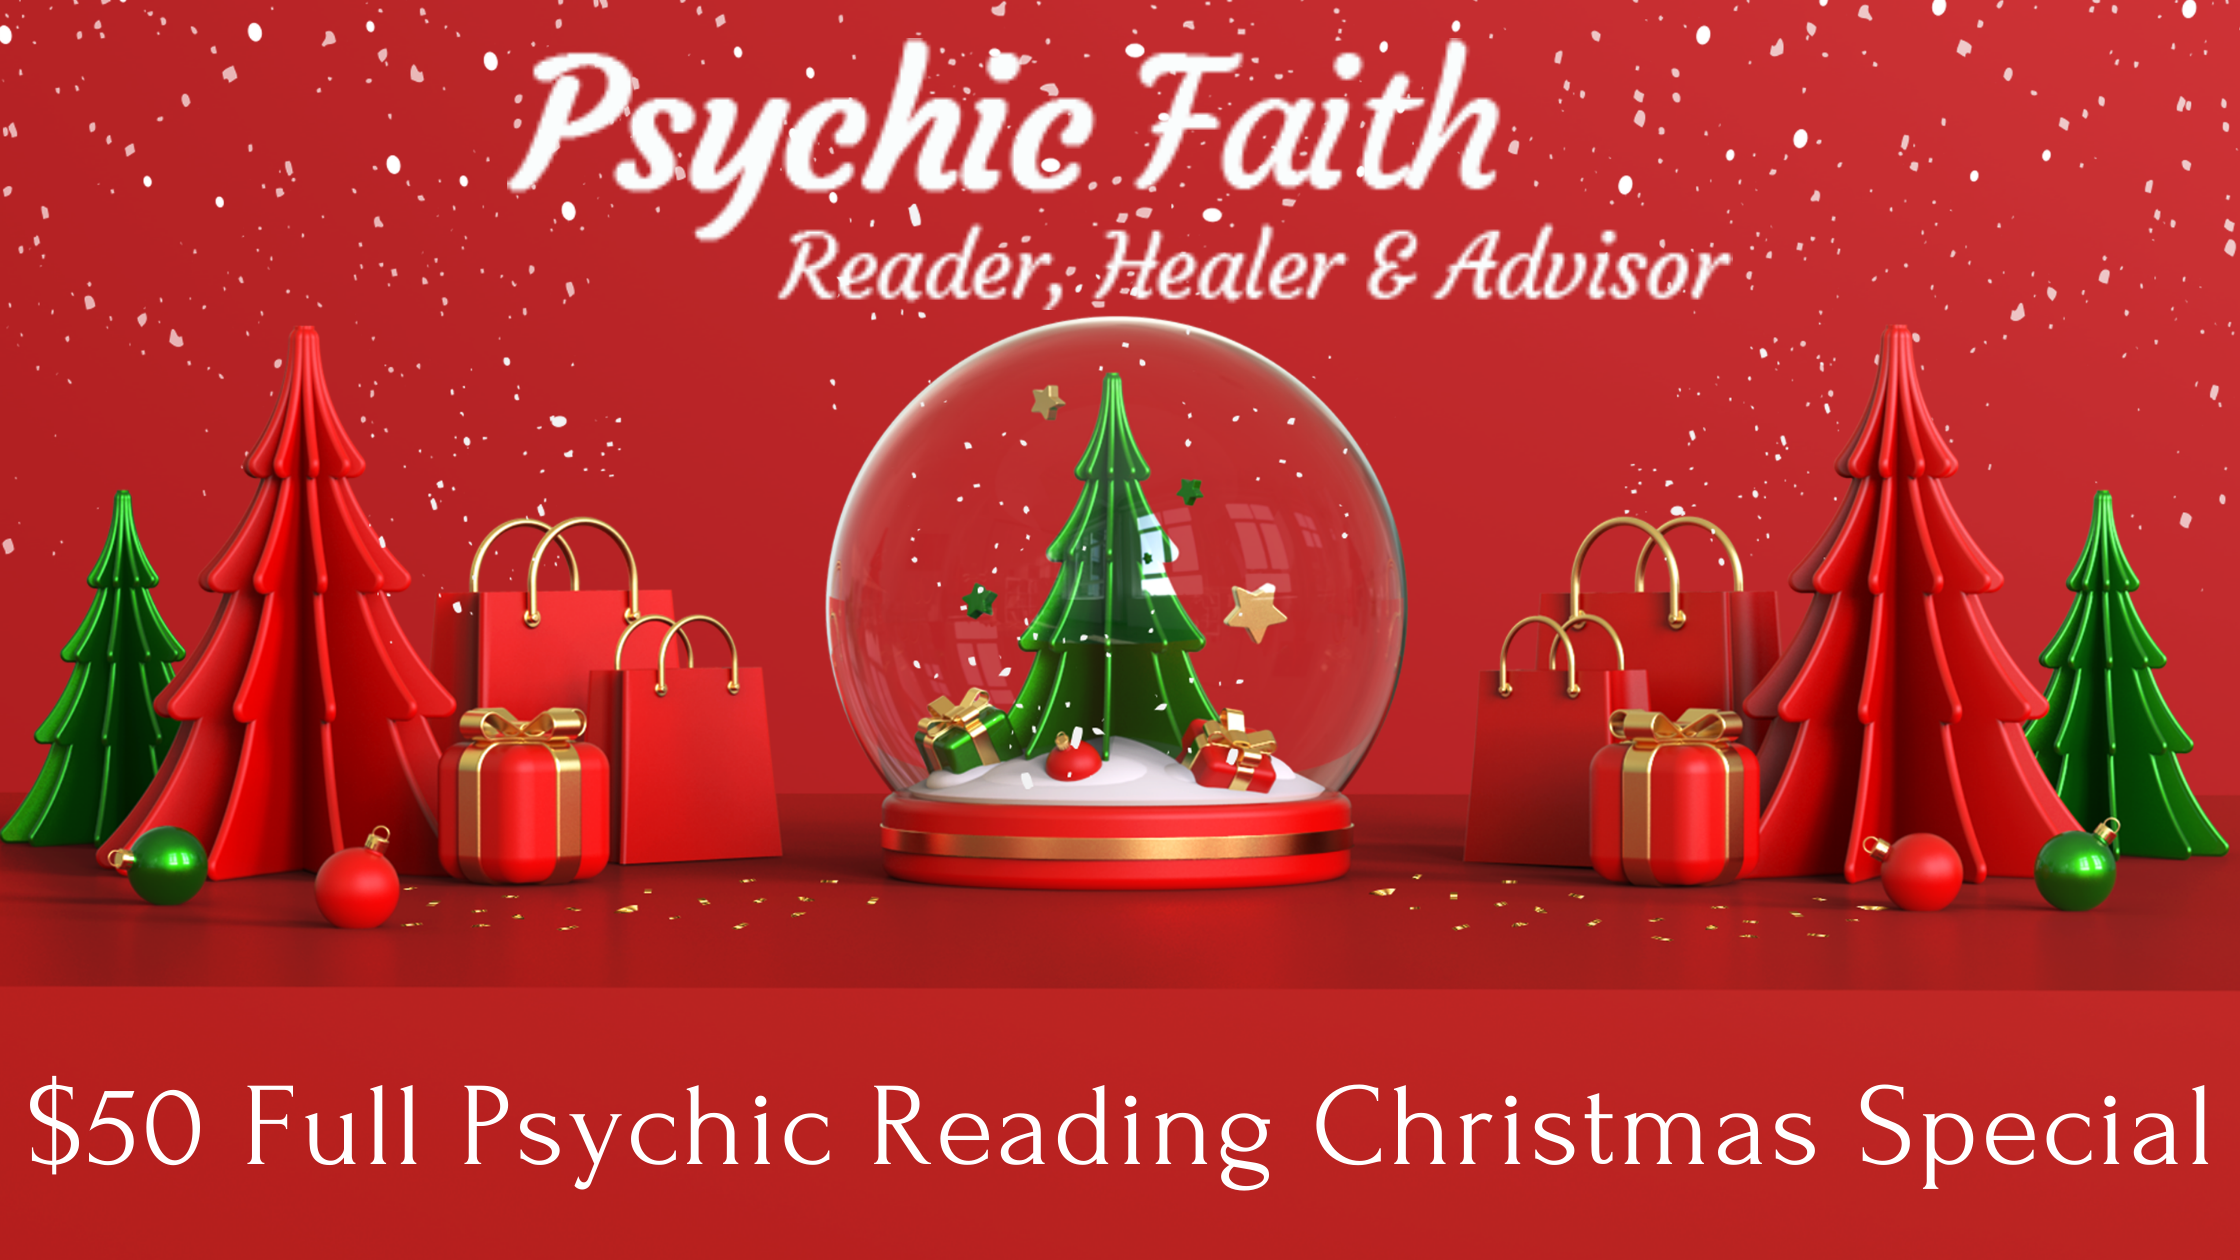 Christmas Psychic Reading Special